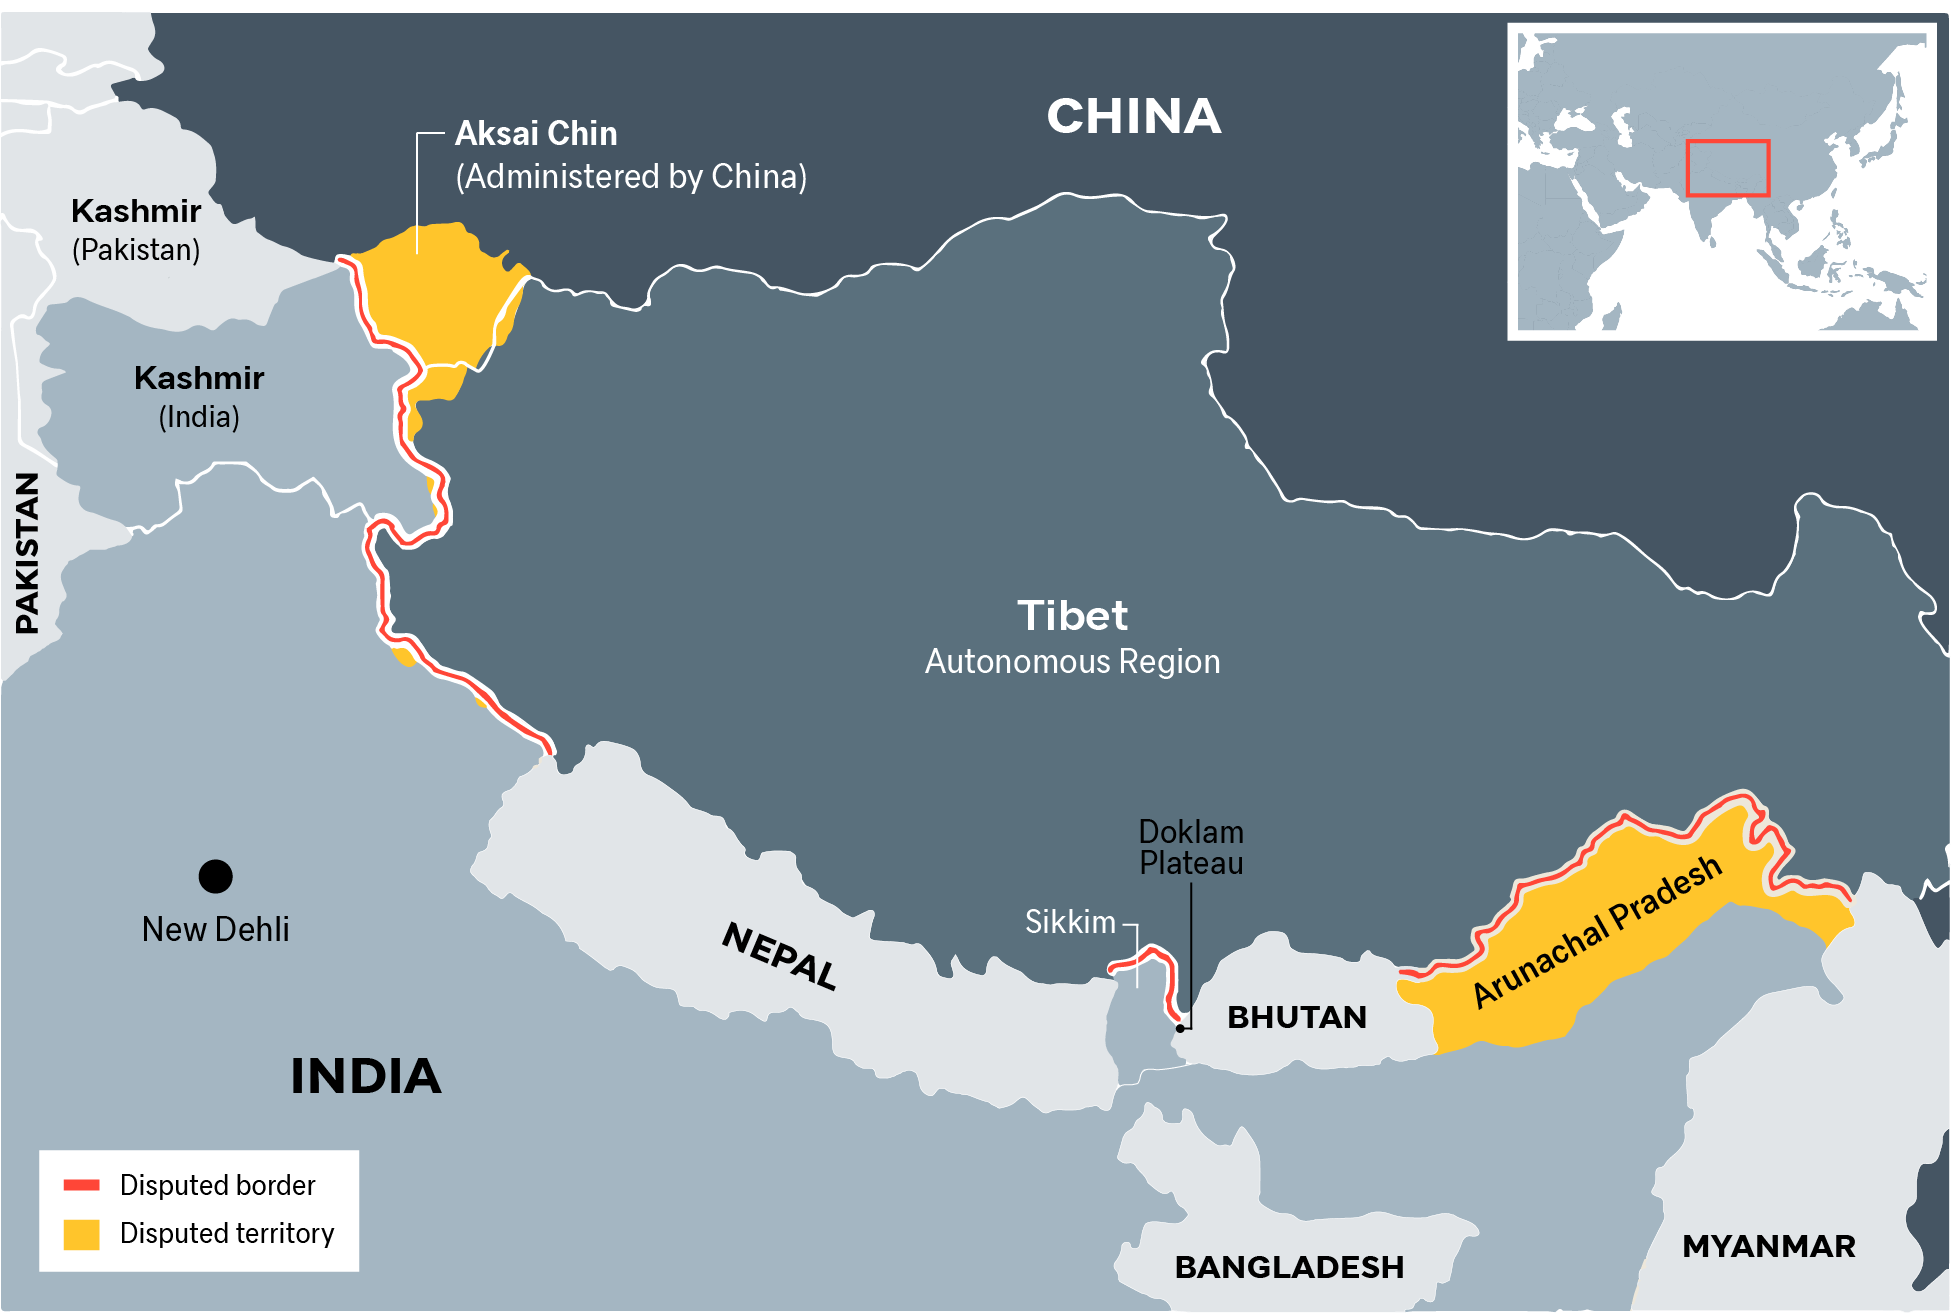 The China‒India border region and disputed territory.